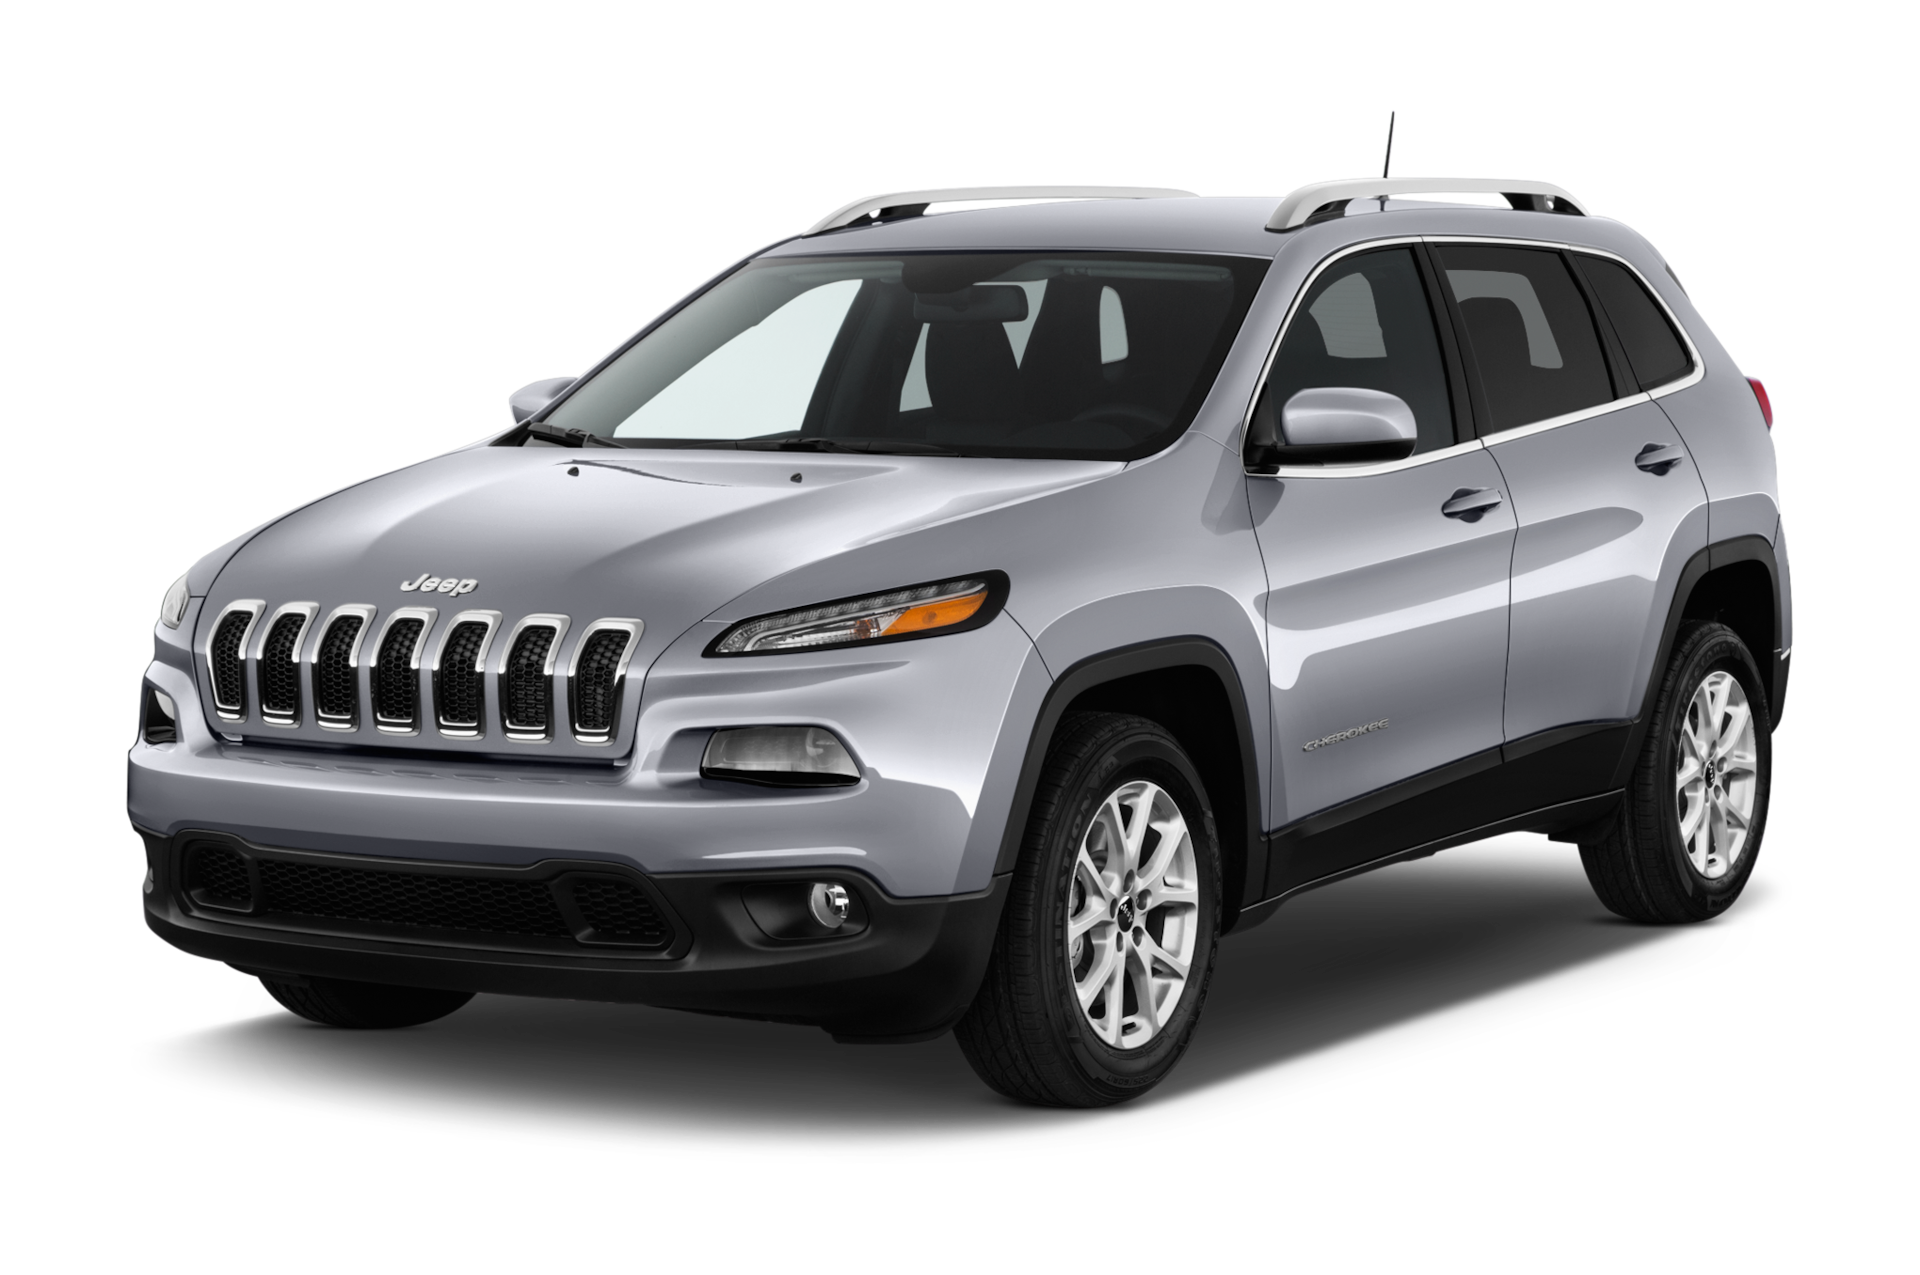 2018 Jeep Cherokee Prices, Reviews, and Photos - MotorTrend